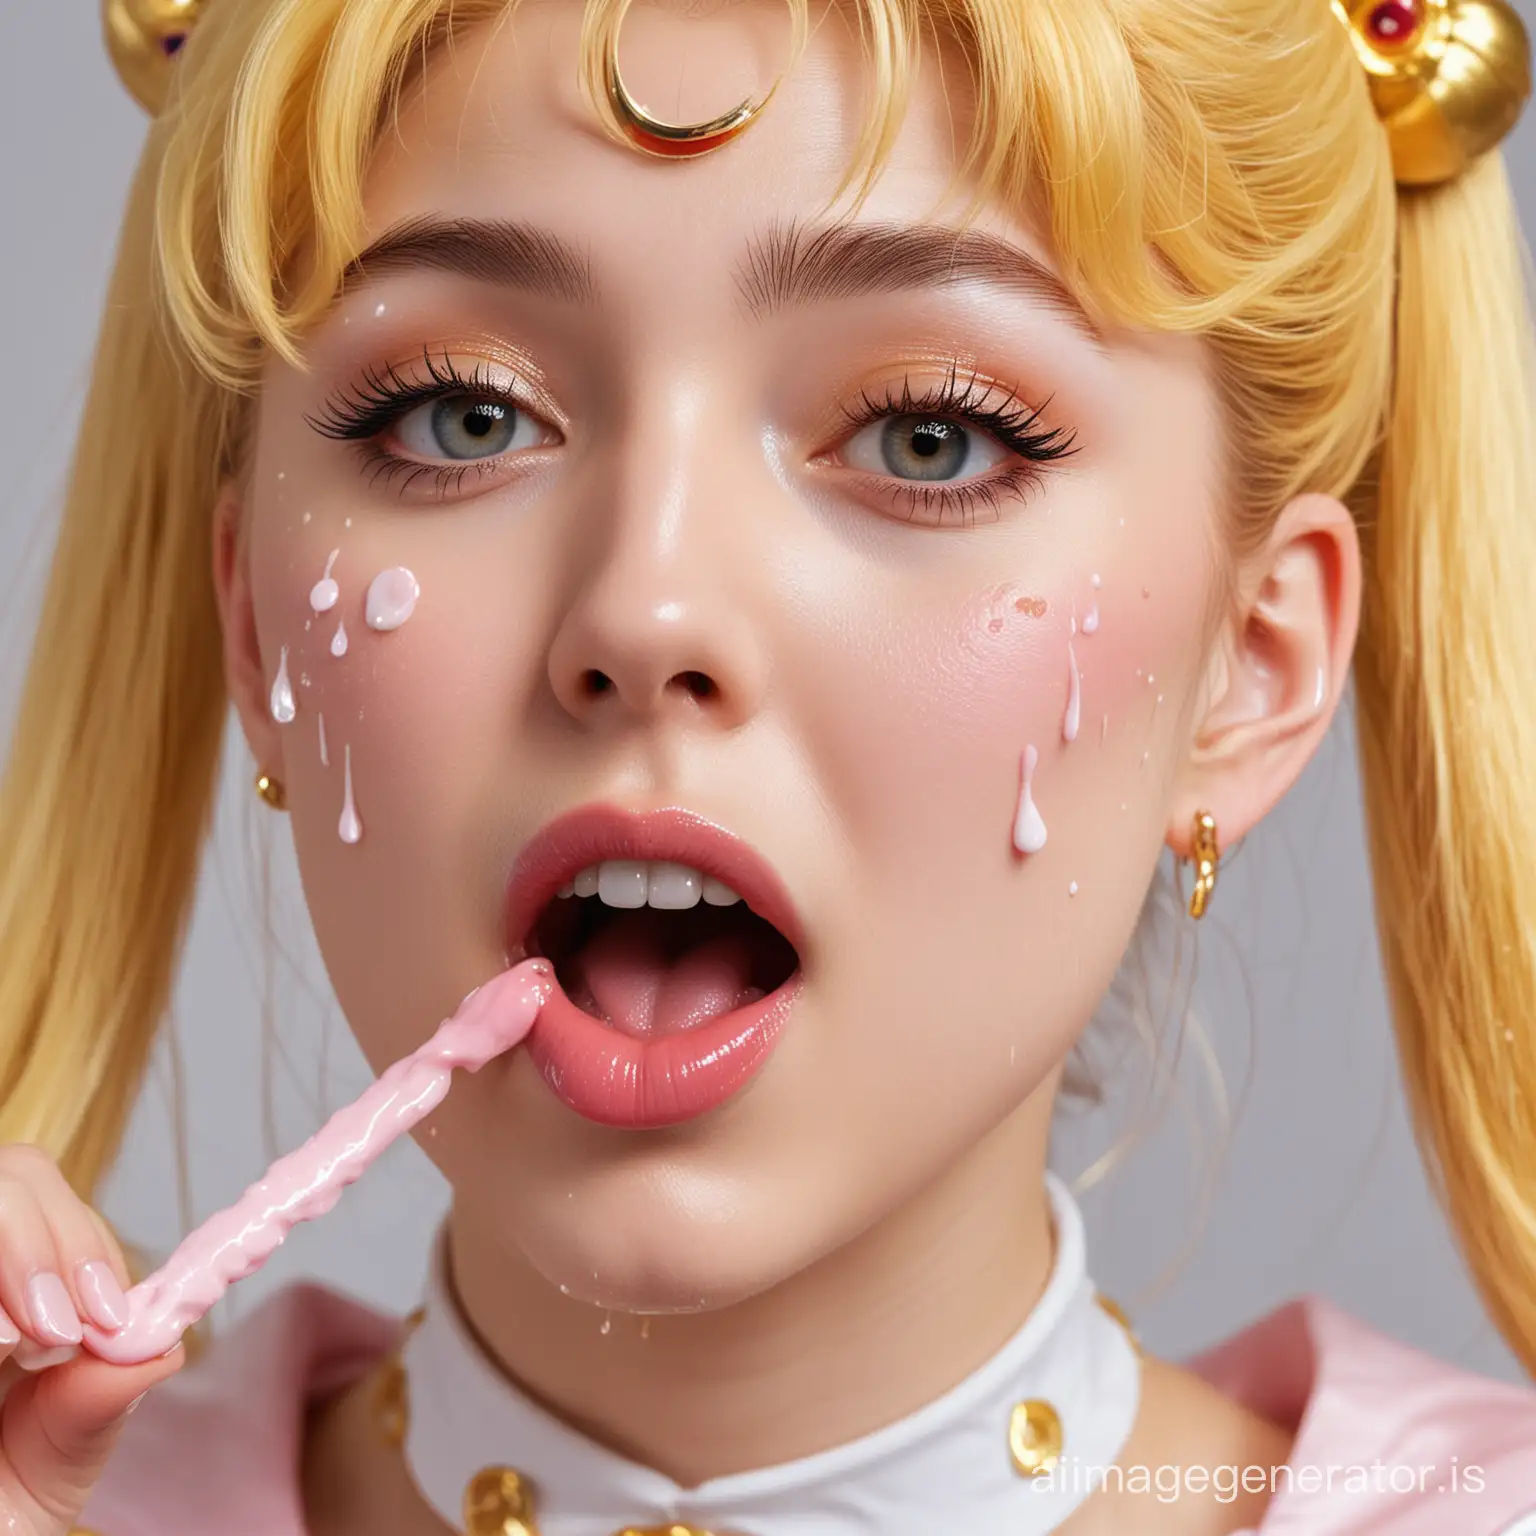 An image of sailor moon, head tilted back slightly, playfully trying to catch cream dripping onto her chin and face (from out of frame) with her tongue